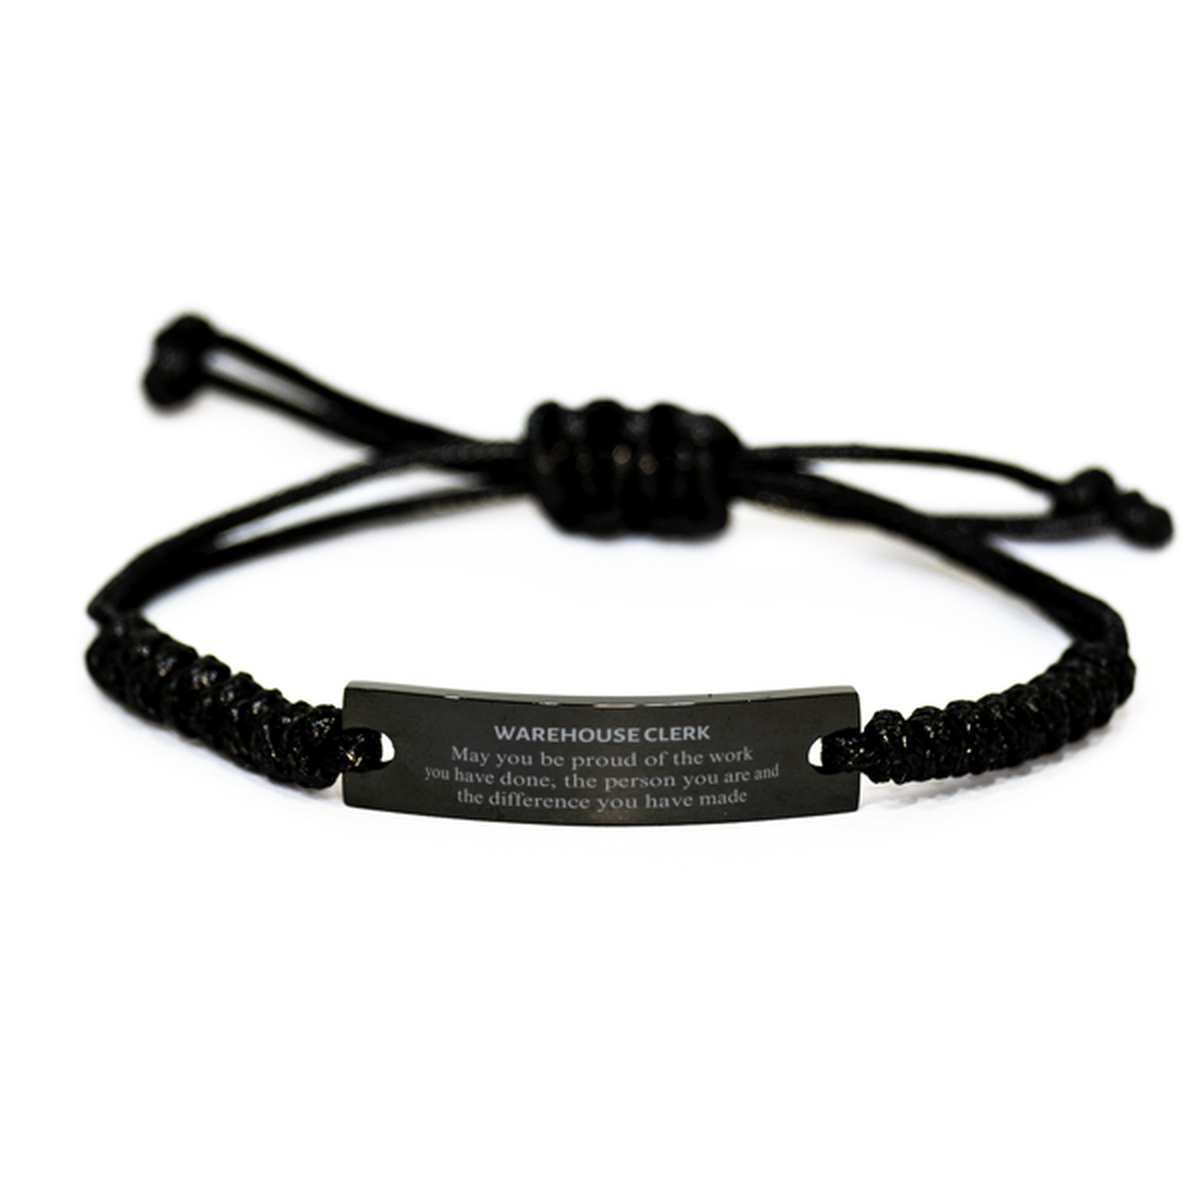 Warehouse Clerk May you be proud of the work you have done, Retirement Warehouse Clerk Black Rope Bracelet for Colleague Appreciation Gifts Amazing for Warehouse Clerk